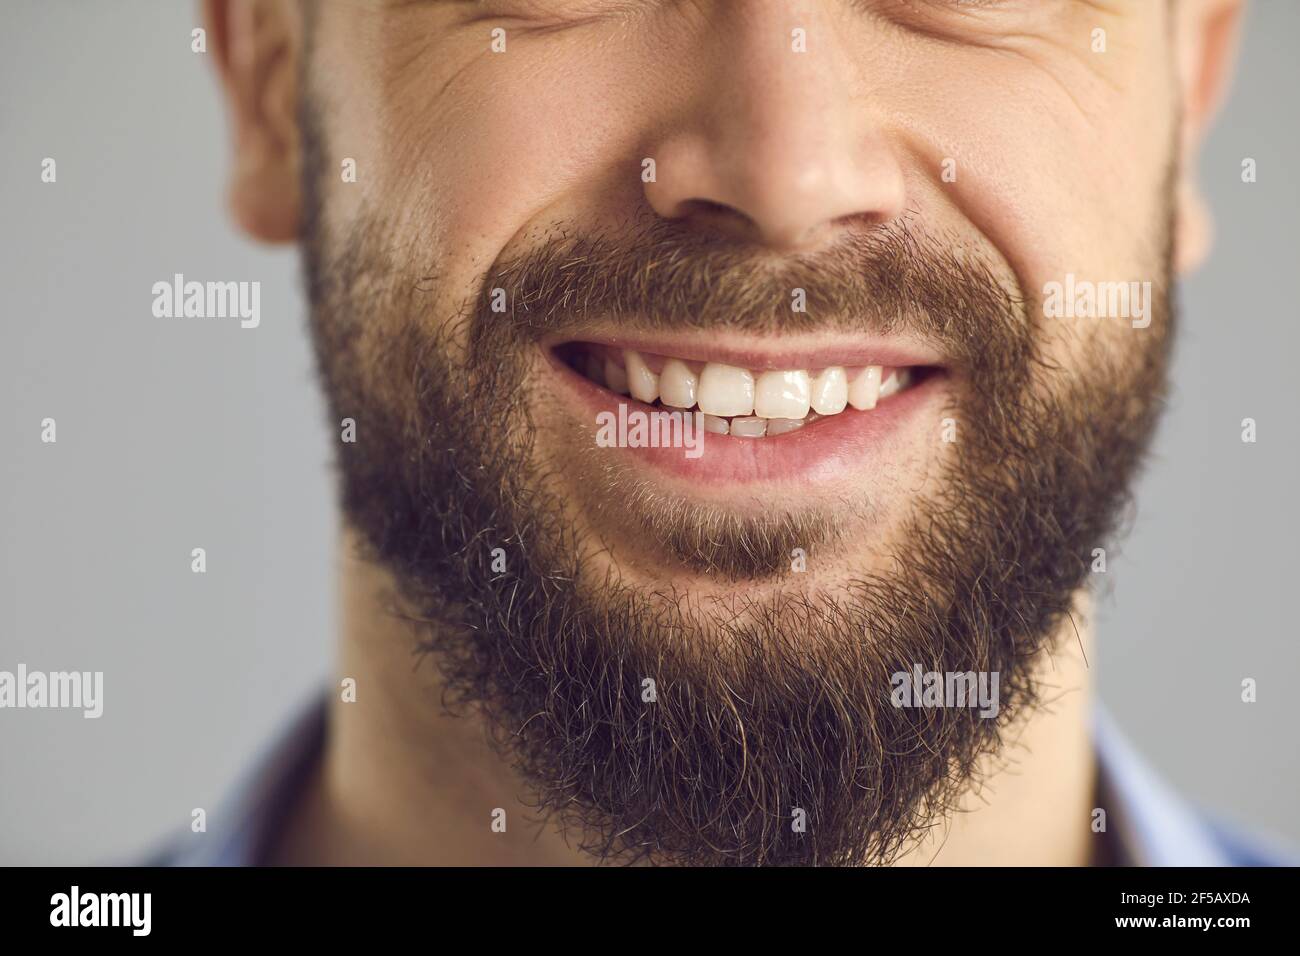 Closeup studio shot of lower part of face of happy smiling young man with brown beard Stock Photo